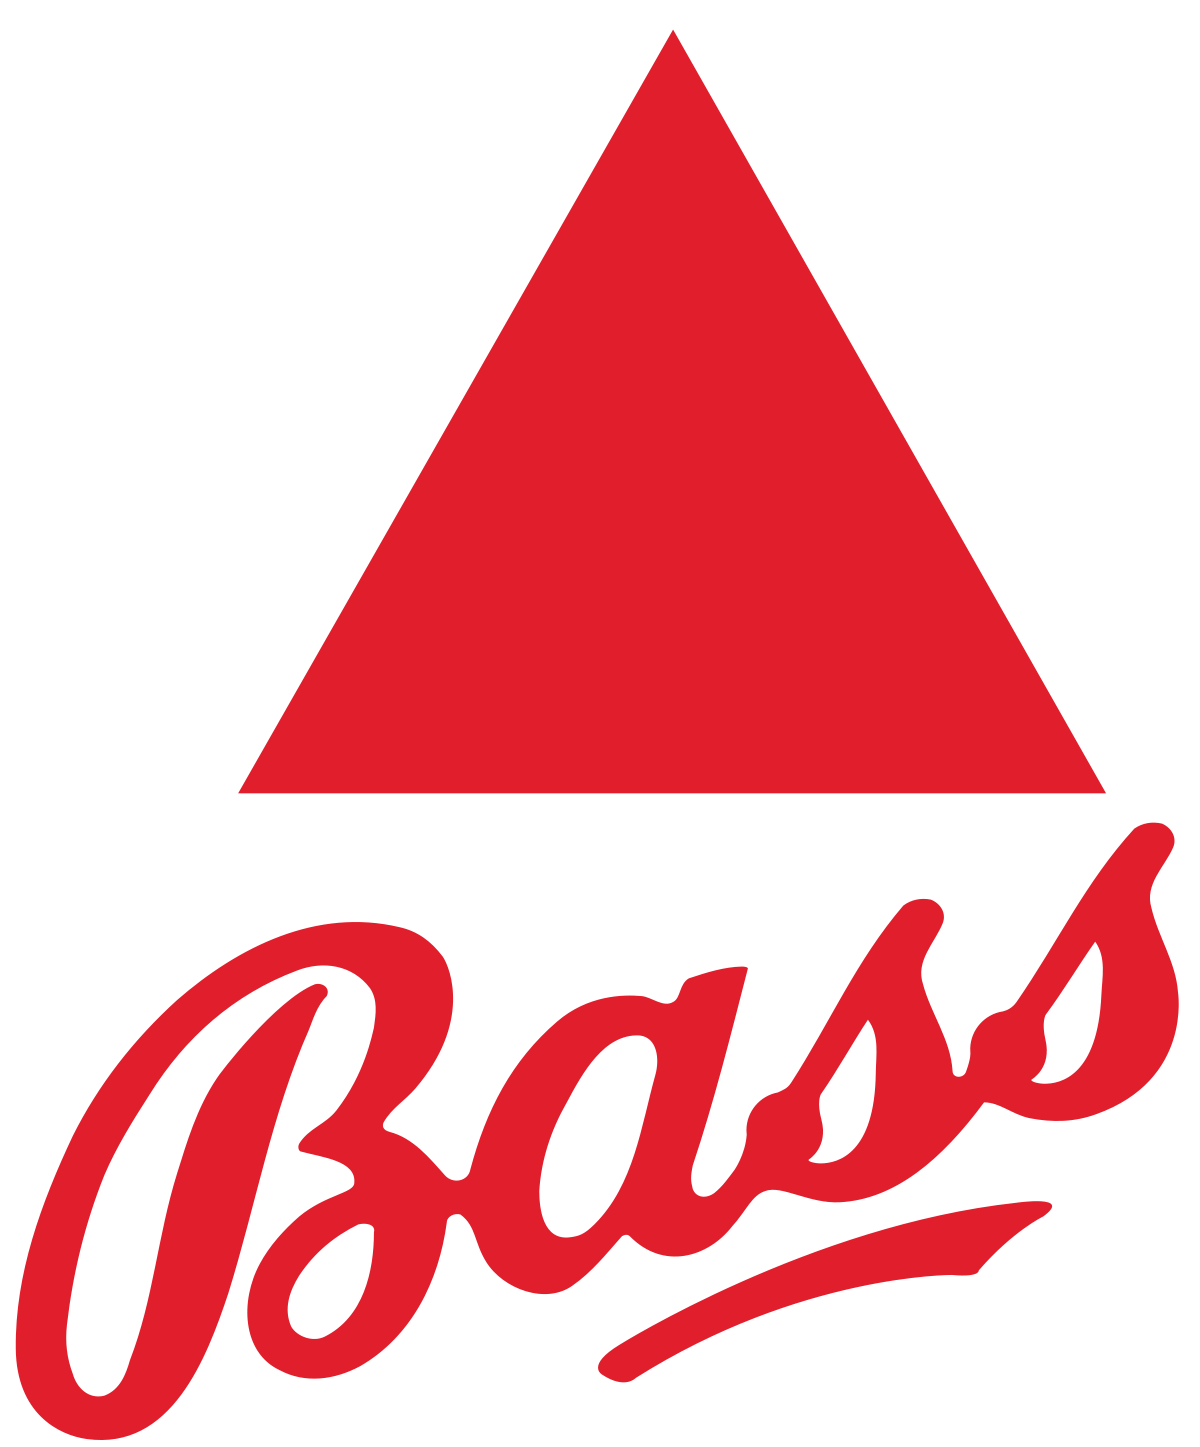 Companies with 4 Red Triangles Logo - Bass Brewery